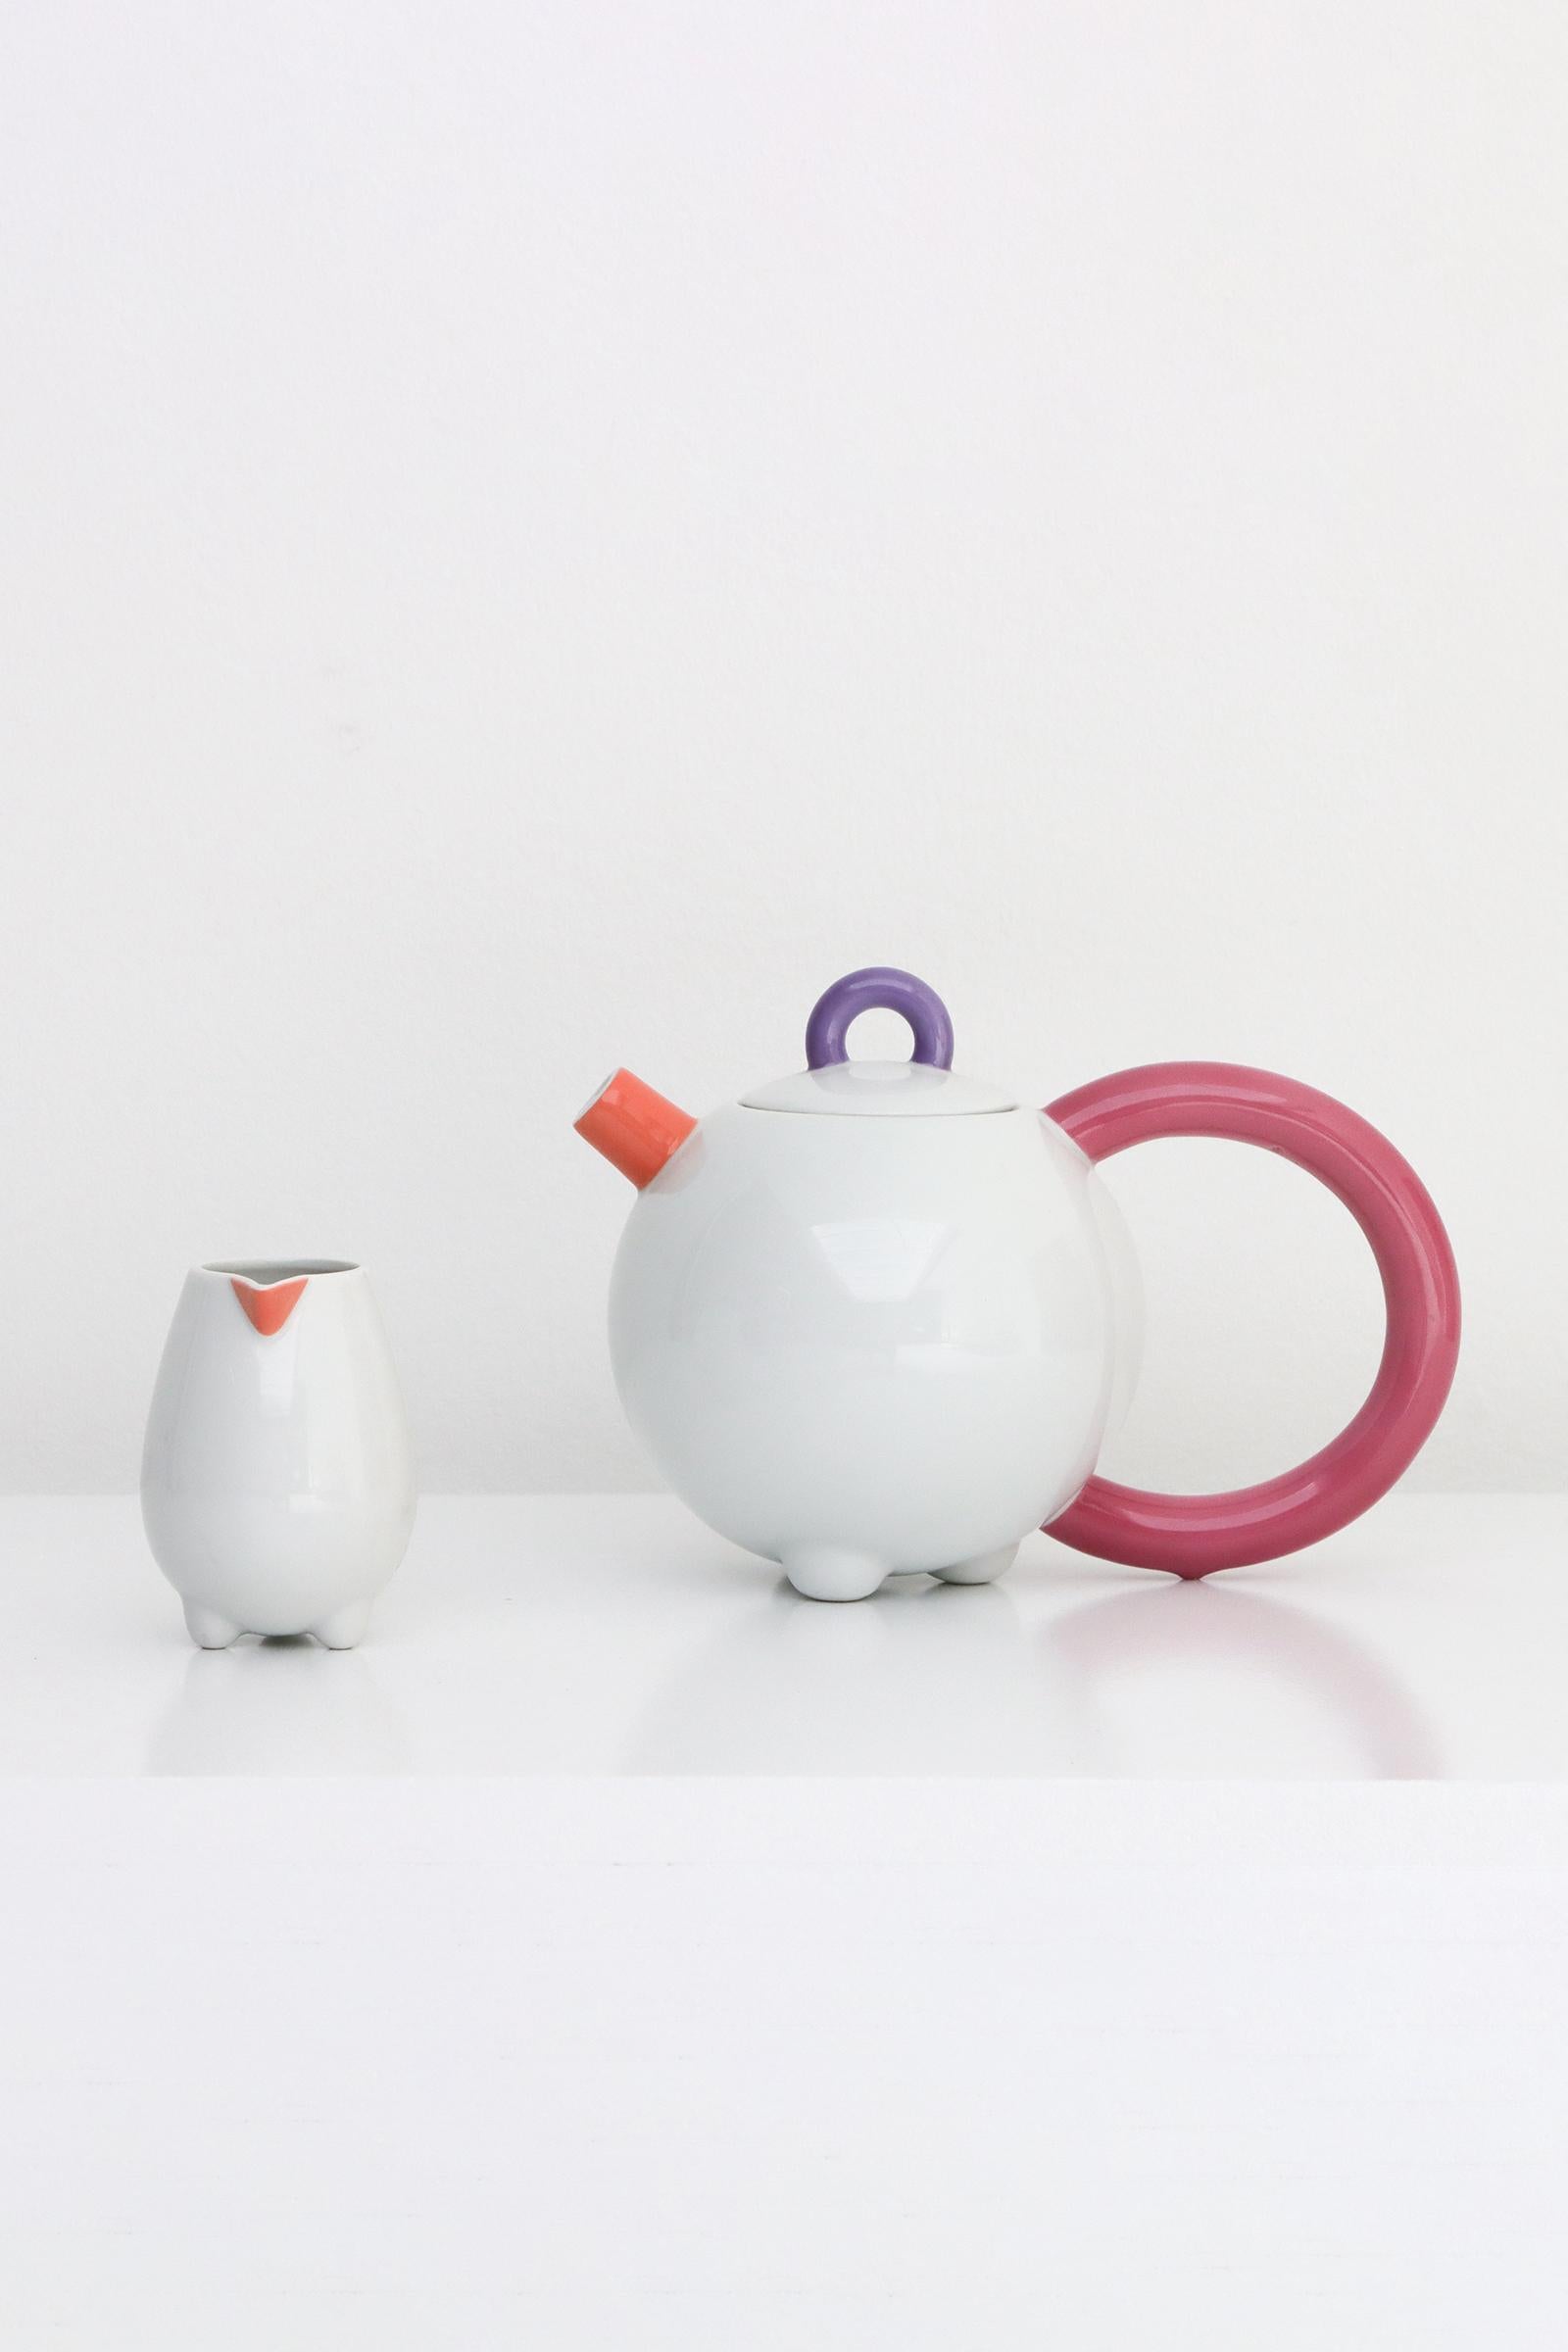 Matteo Thun was one of the co-founders of the Memphis group in 1981. He worked together with many different companies such as Bieffeplast, Swatch and Tiffany. This porcelain coffee / tea pot he designed for Arzberg, Germany in the 1980s. Thun